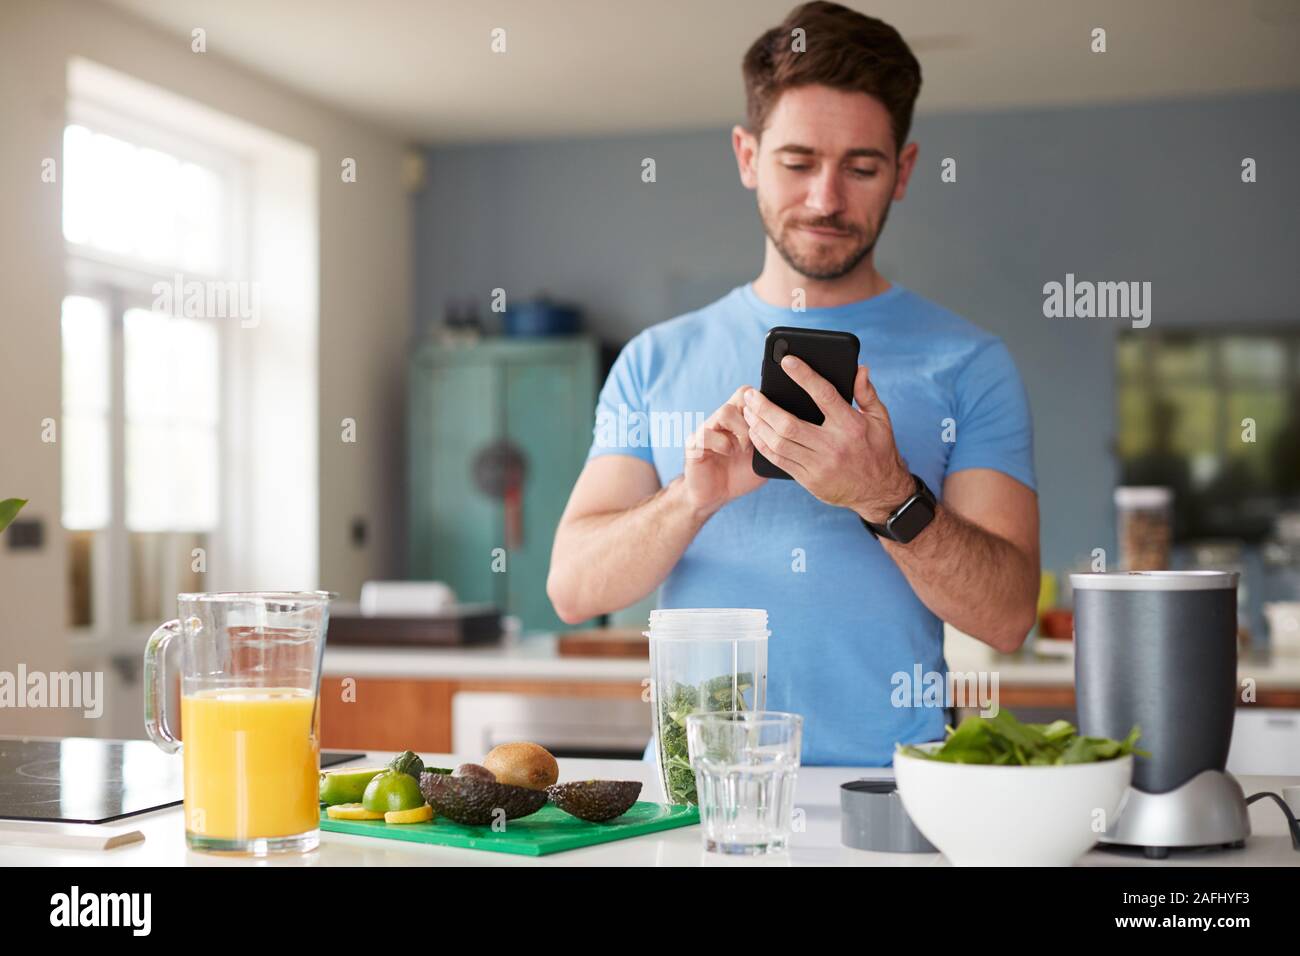 Man Using Fitness Tracker To Count Calories For Post Workout Juice Drink He Is Making Stock Photo